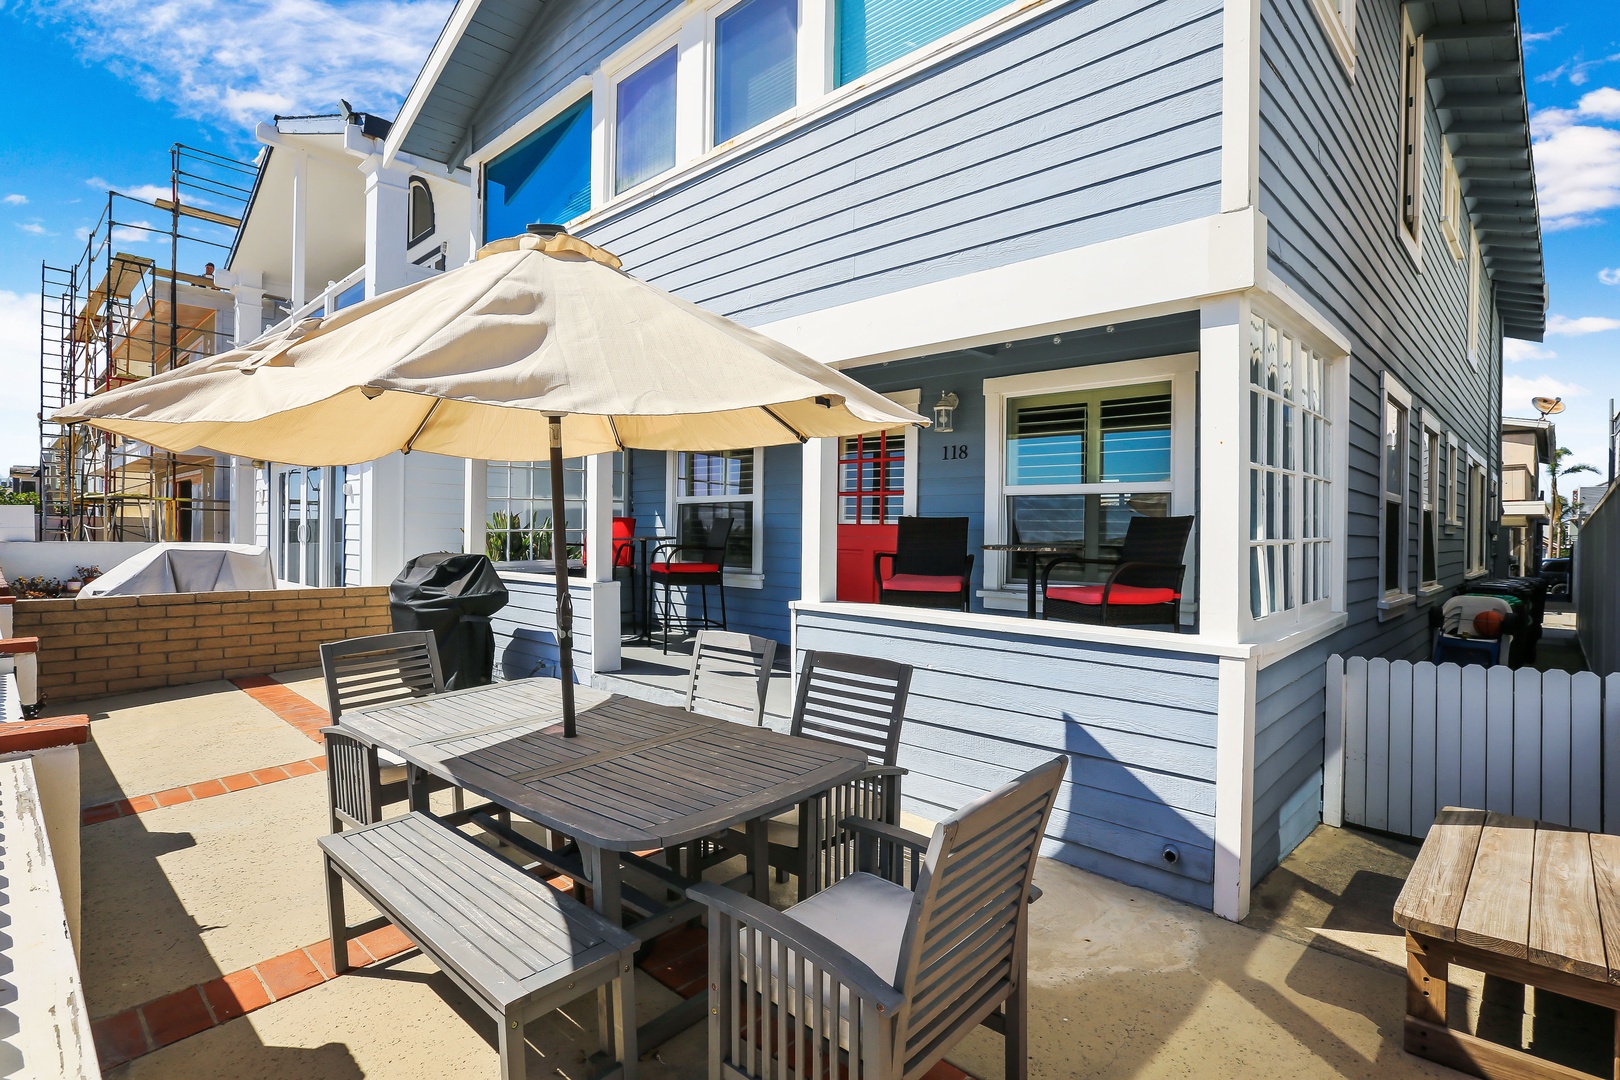 Outdoor dining with ample seating and gas BBQ grill